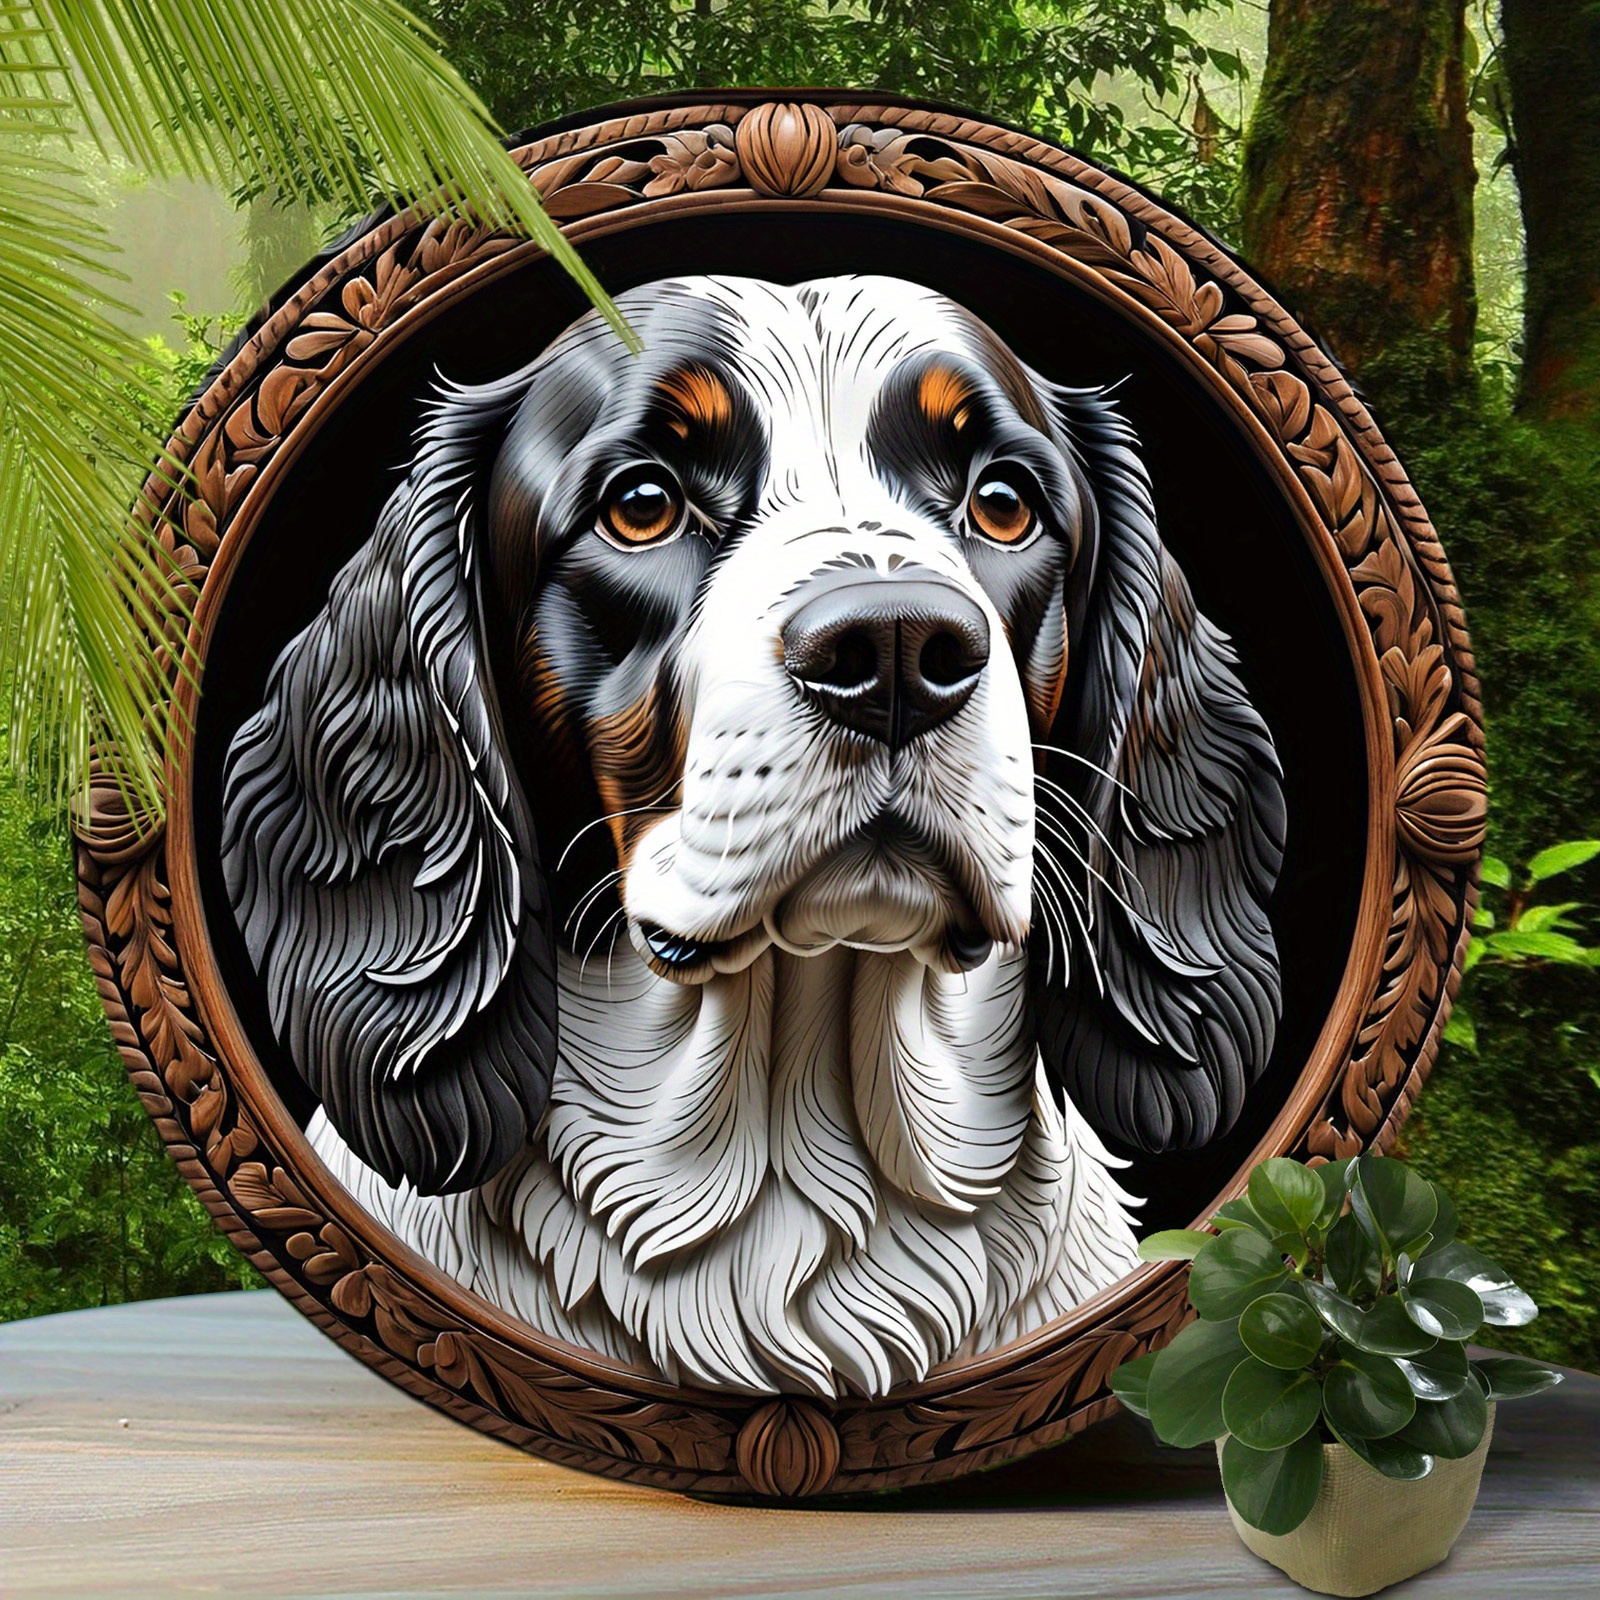 

1pc, English Springer Spaniel Sign - Cute Dog Aluminum Sign, Suitable For Home Room Cafe Bedroom Bar Living Room Garage Wall Decoration, Round Fashion Art Aesthetic, Holiday Gift 8x8 Inch (20x20cm)